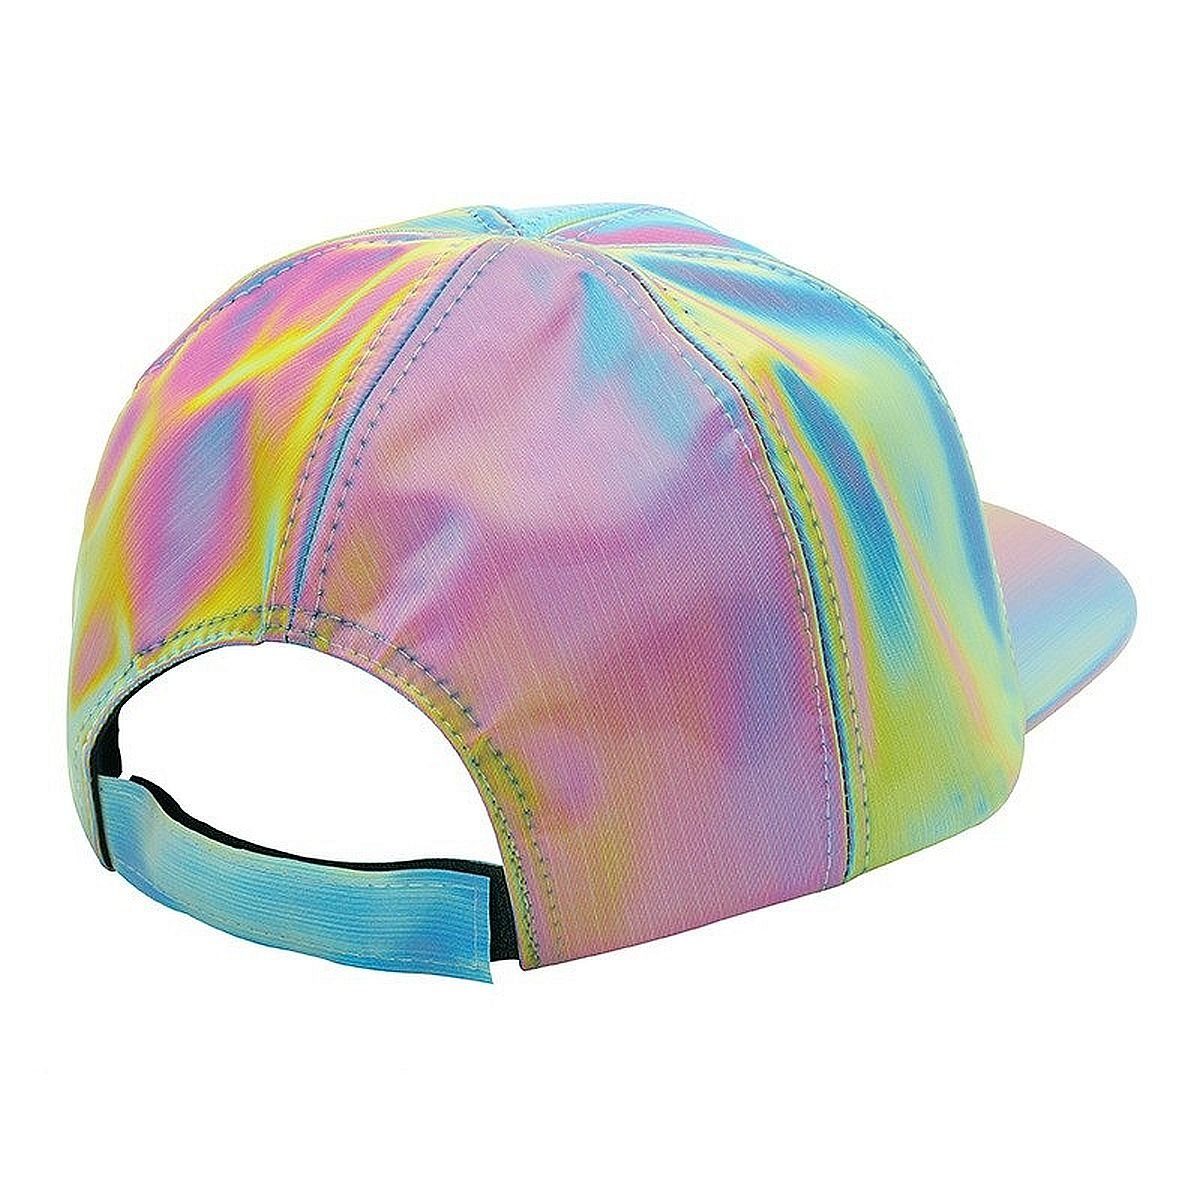 ABYstyle Flat Cap Zurück McFly Marty die Future in Cap the to Zukunft Back